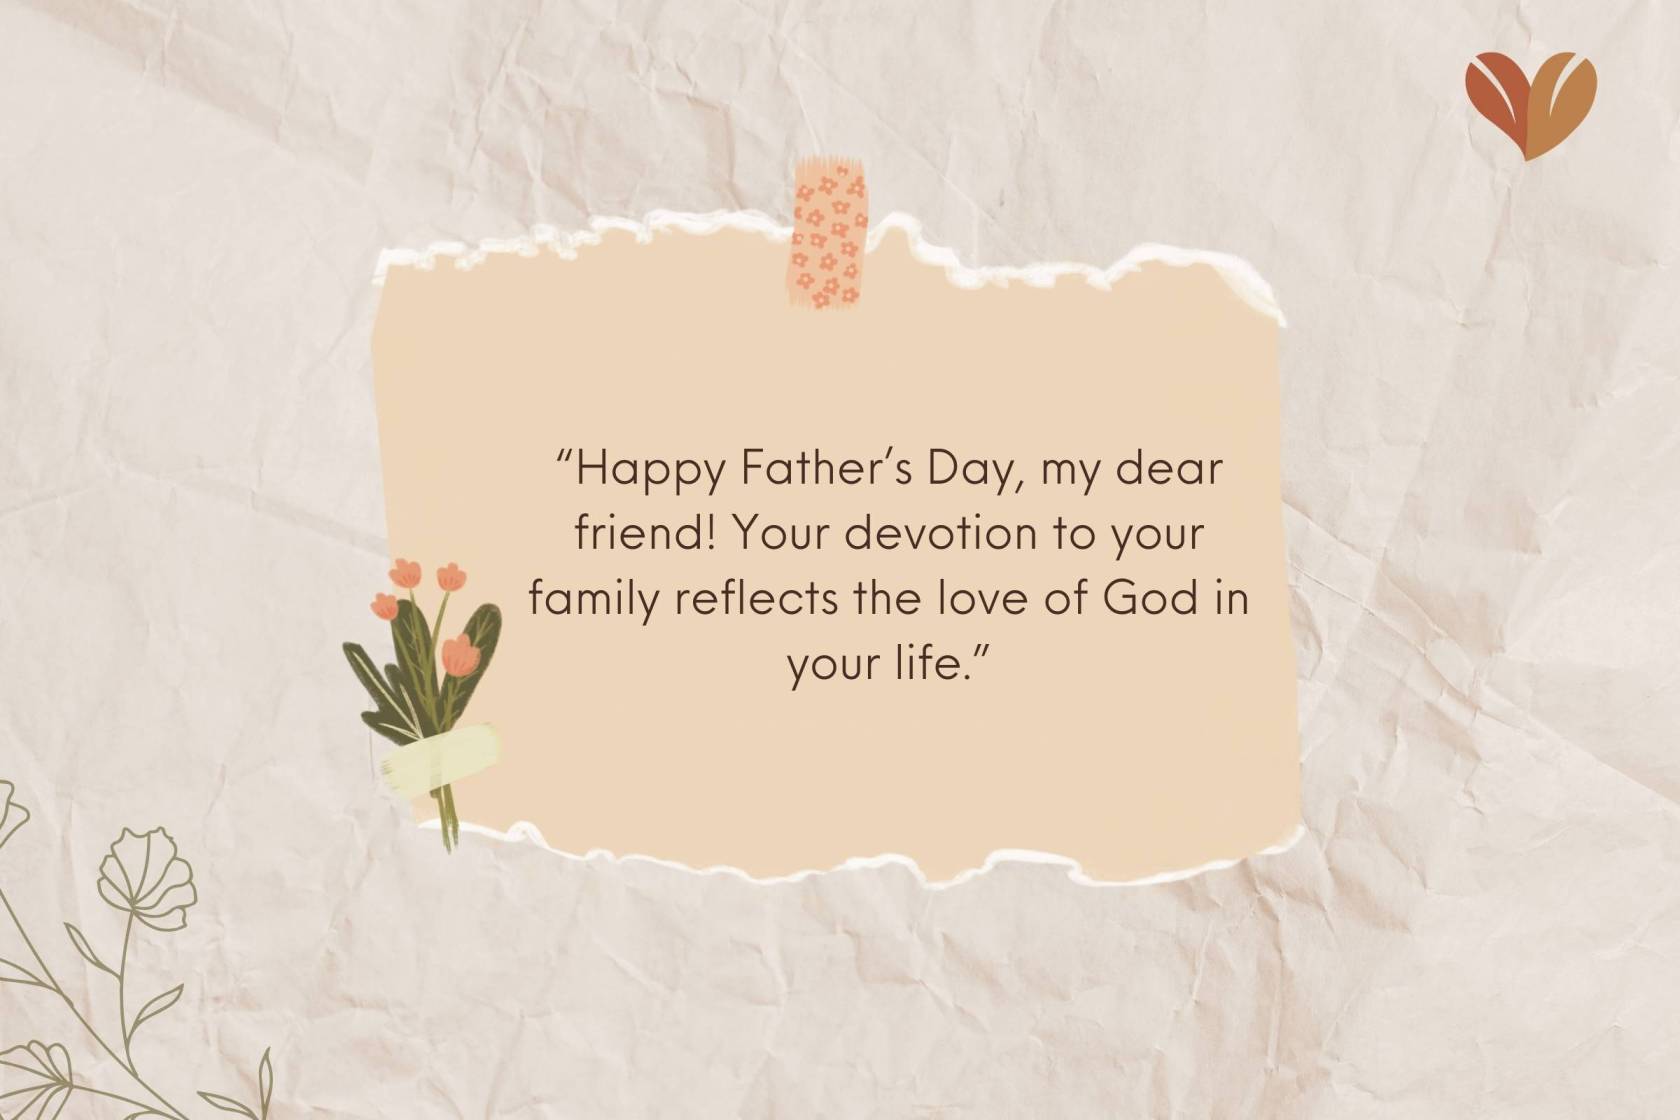 Meaningful Religious Messages for Friends on Father's Day